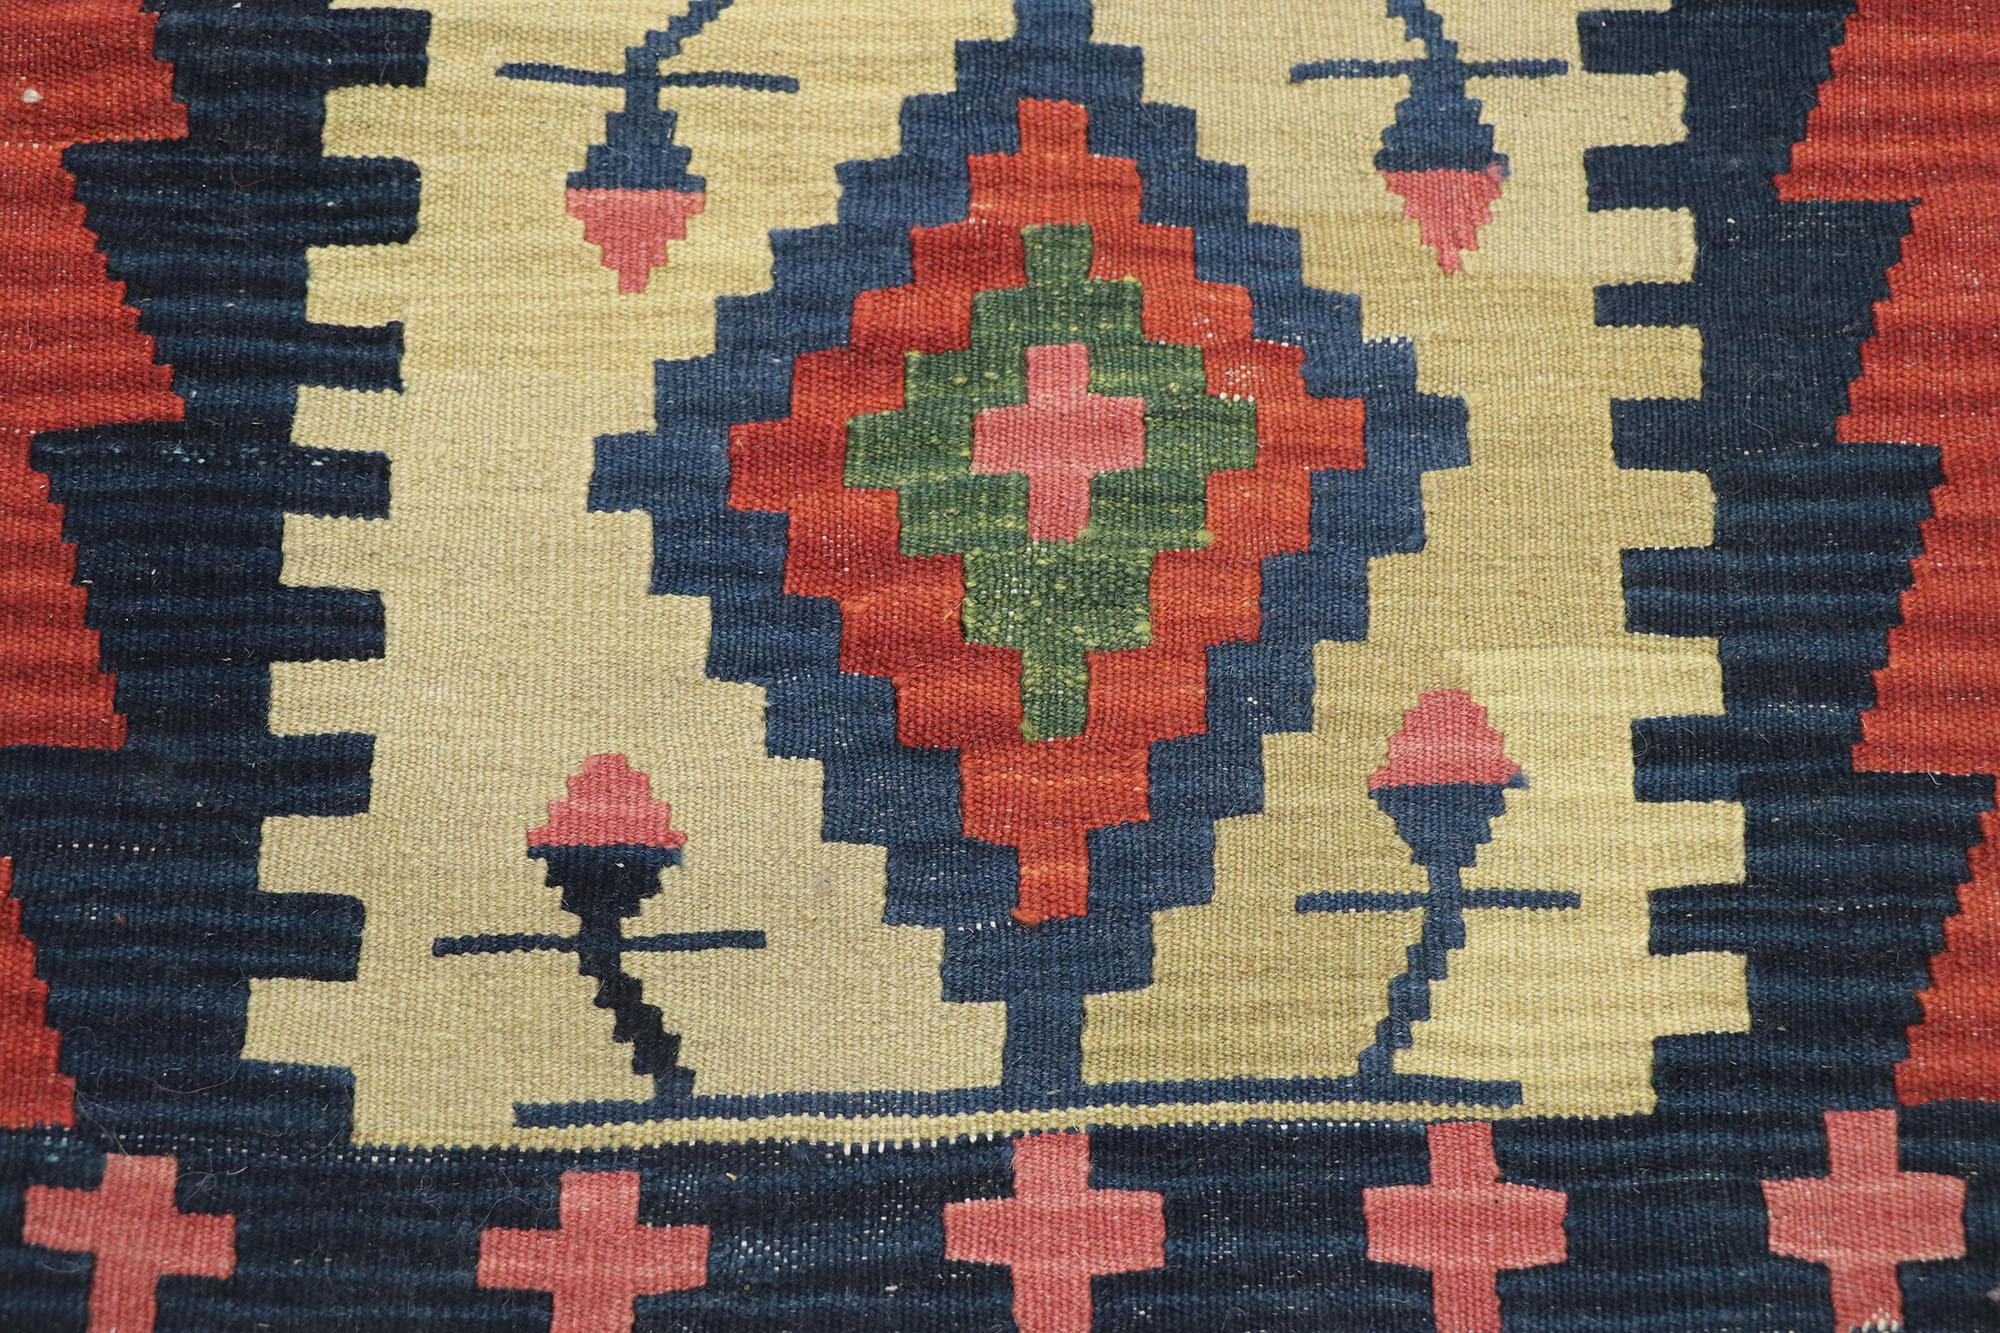 Vintage Persian Shiraz Kilim Rug, Luxury Lodge Meets Modern Southwest Style In Good Condition For Sale In Dallas, TX